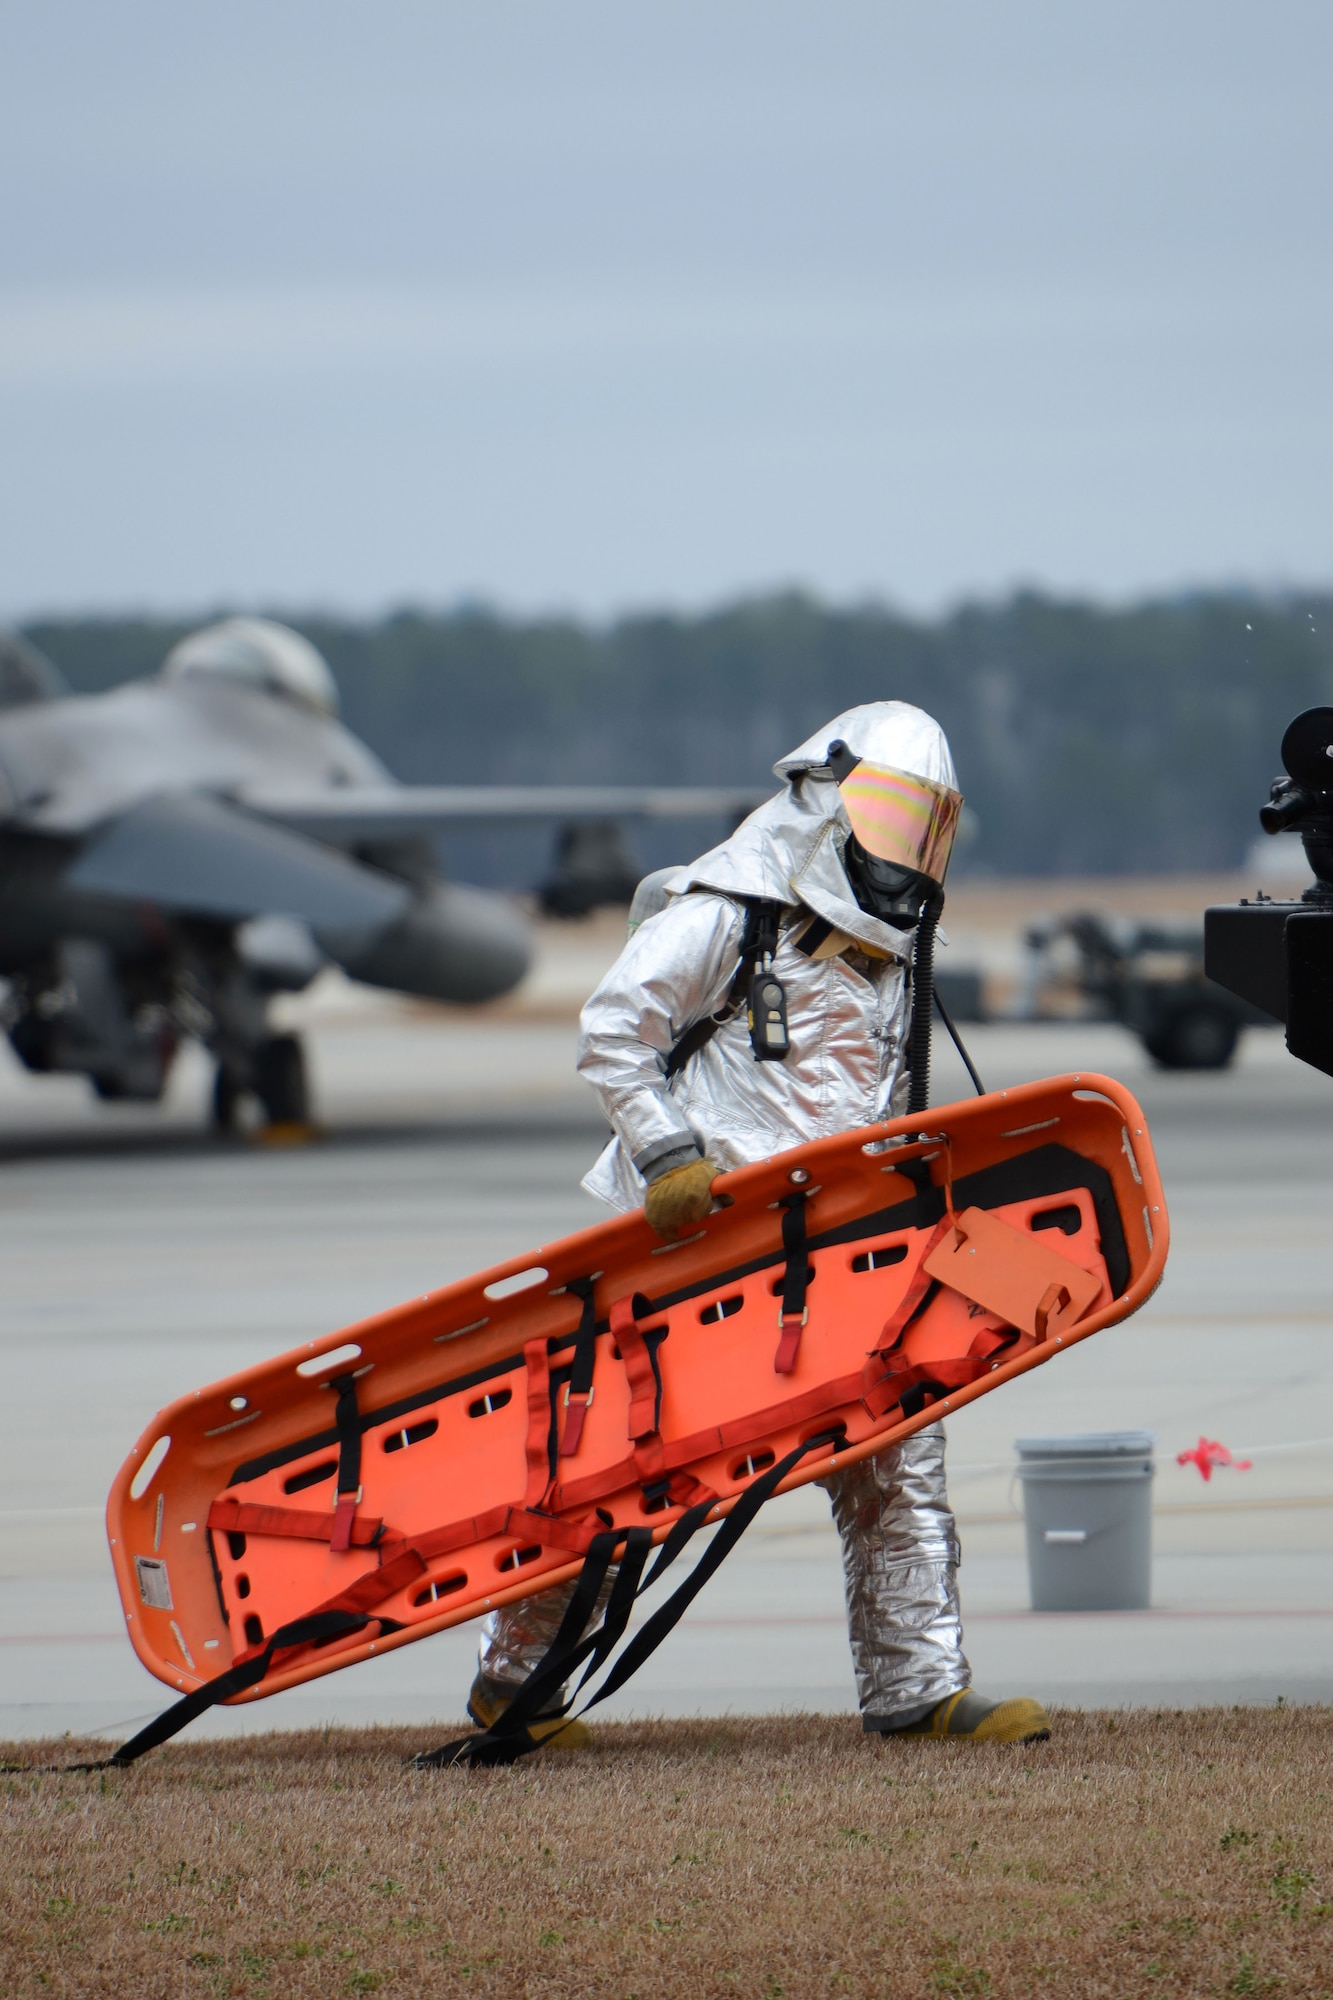 Firefighters with the 169th Civil Engineering Squadron at McEntire Joint National Guard Base, S.C., respond to a training scenario to remove a pilot from the cockpit of an F-16 Block 52 figher jet Feb. 8, 2013. The aircrew extraction training measures how quickly and safely emergency rescue personnel can remove an incapacitated pilot from a plane during an Operational Readiness Exercise. The 169th Fighter Wing is training for an upcoming Operational Readiness Inspection later this year. (National Guard photo by Tech. Sgt. Caycee Watson/Released)